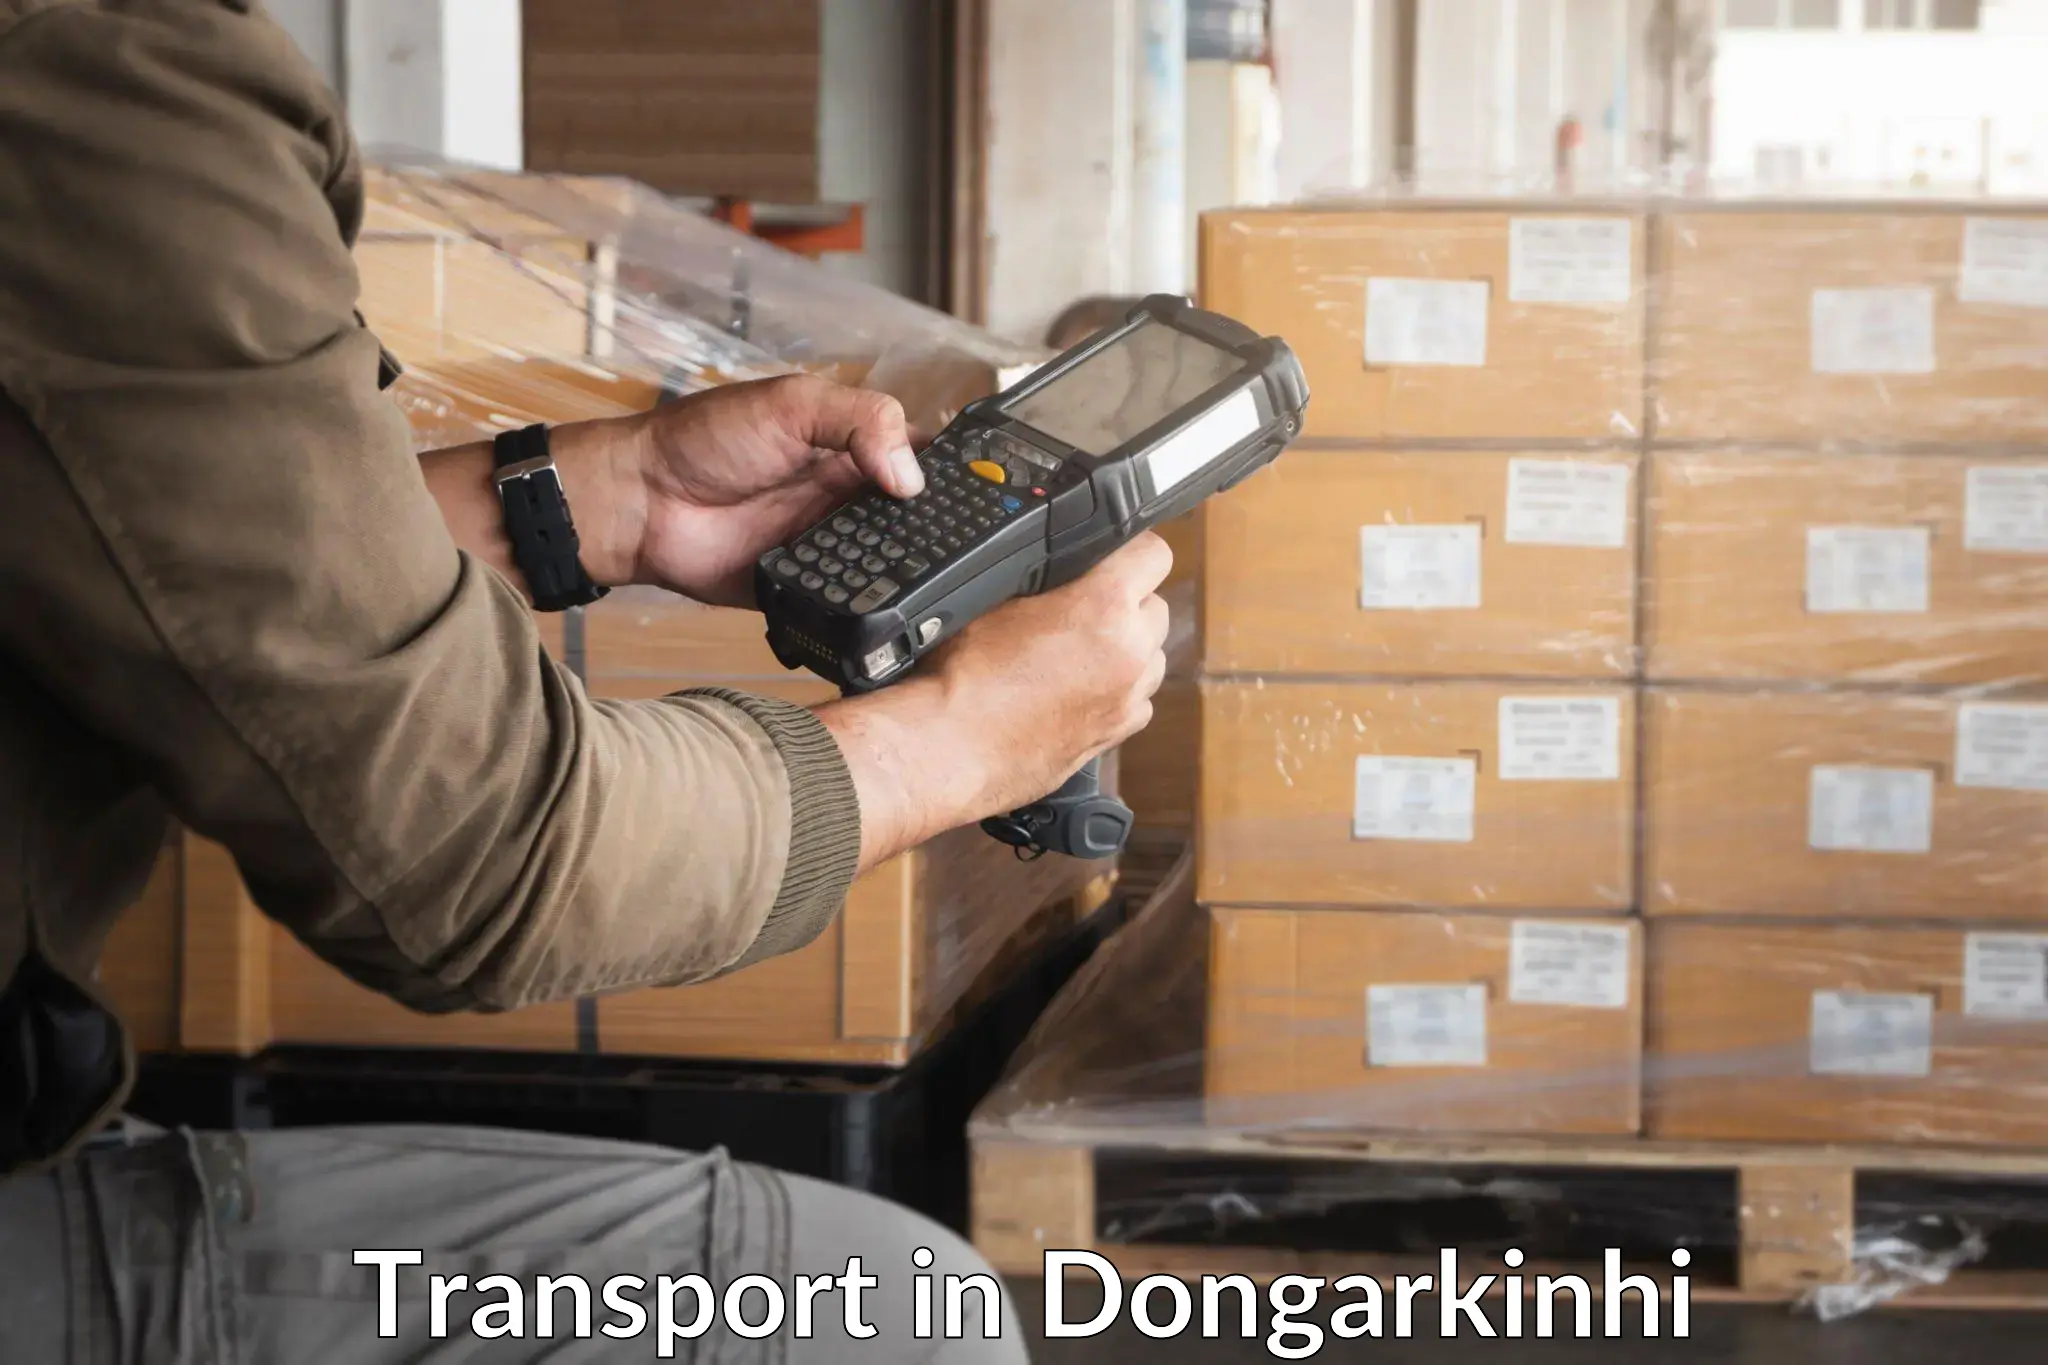 Nationwide transport services in Dongarkinhi